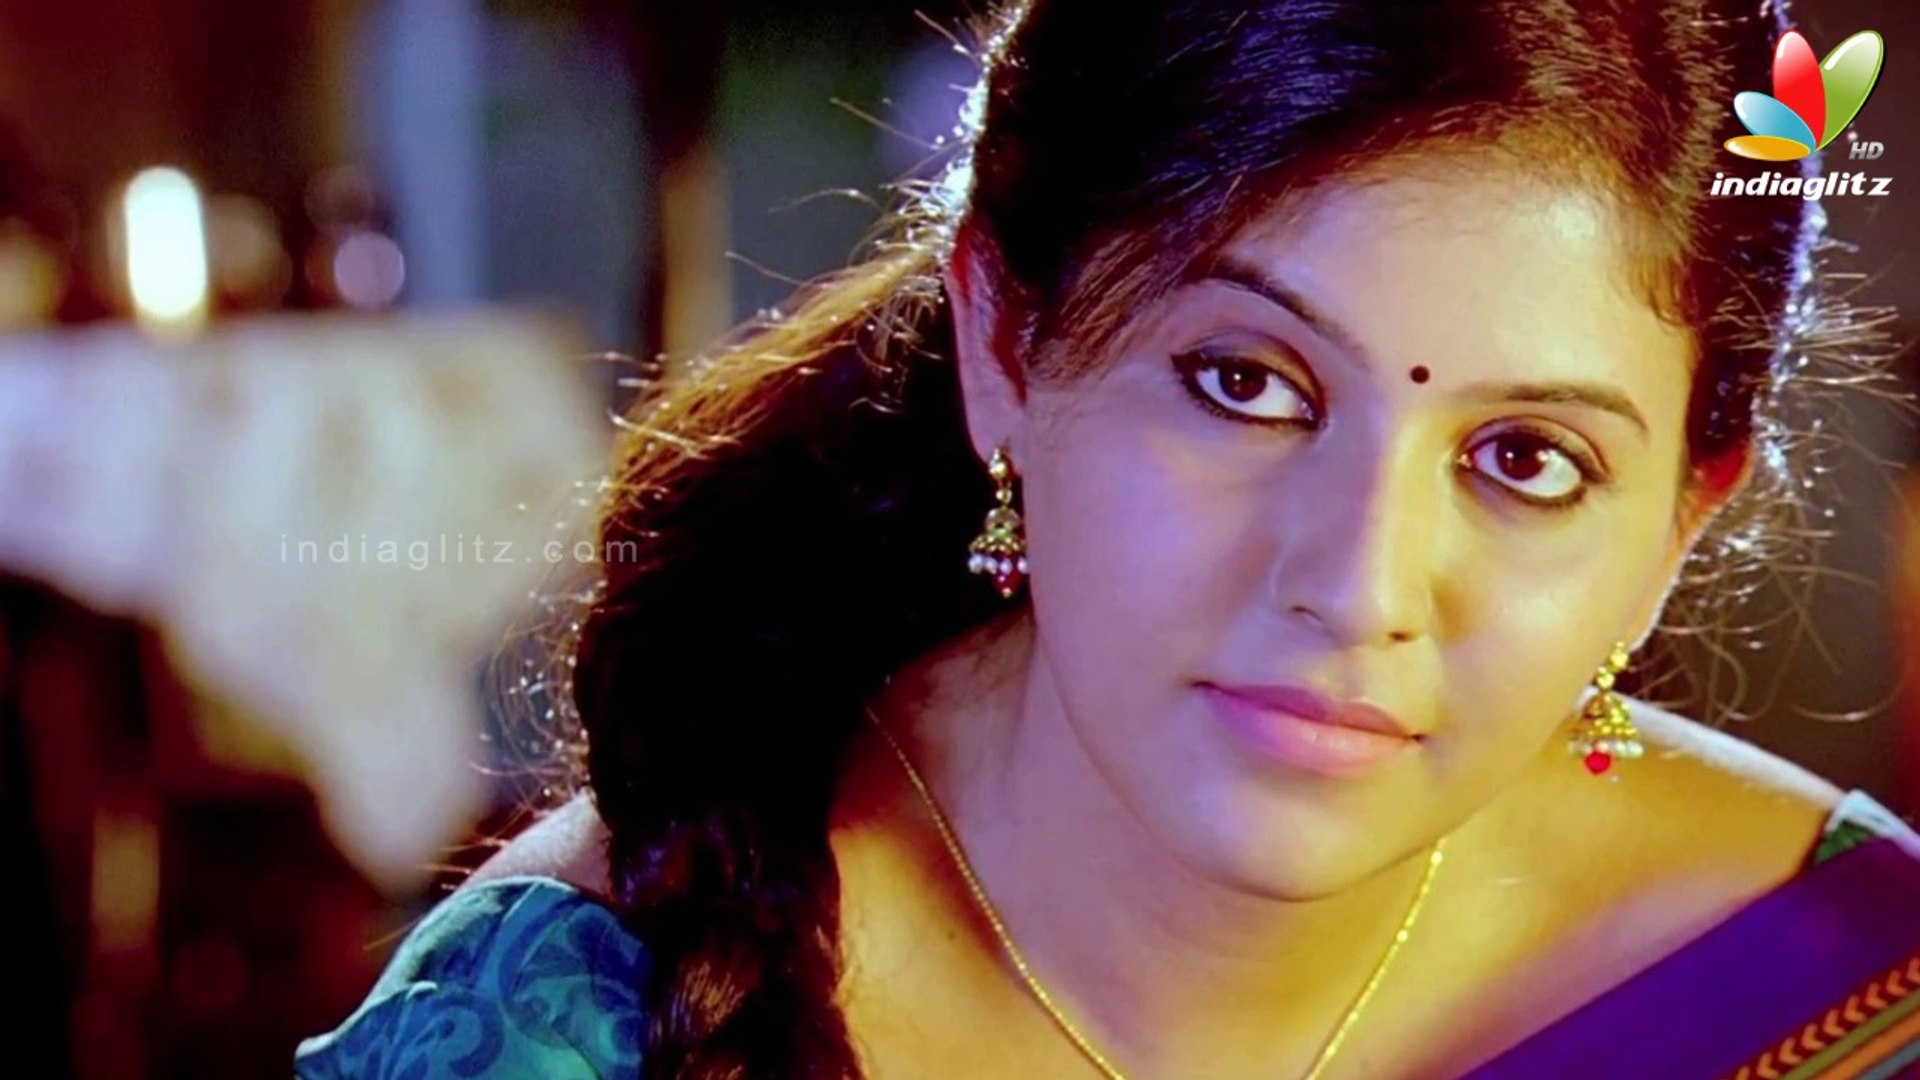 Tamil Accter Anjali Sex Video - Anjali is back in action | New Movie | Hot Tamil Cinema News - video  Dailymotion